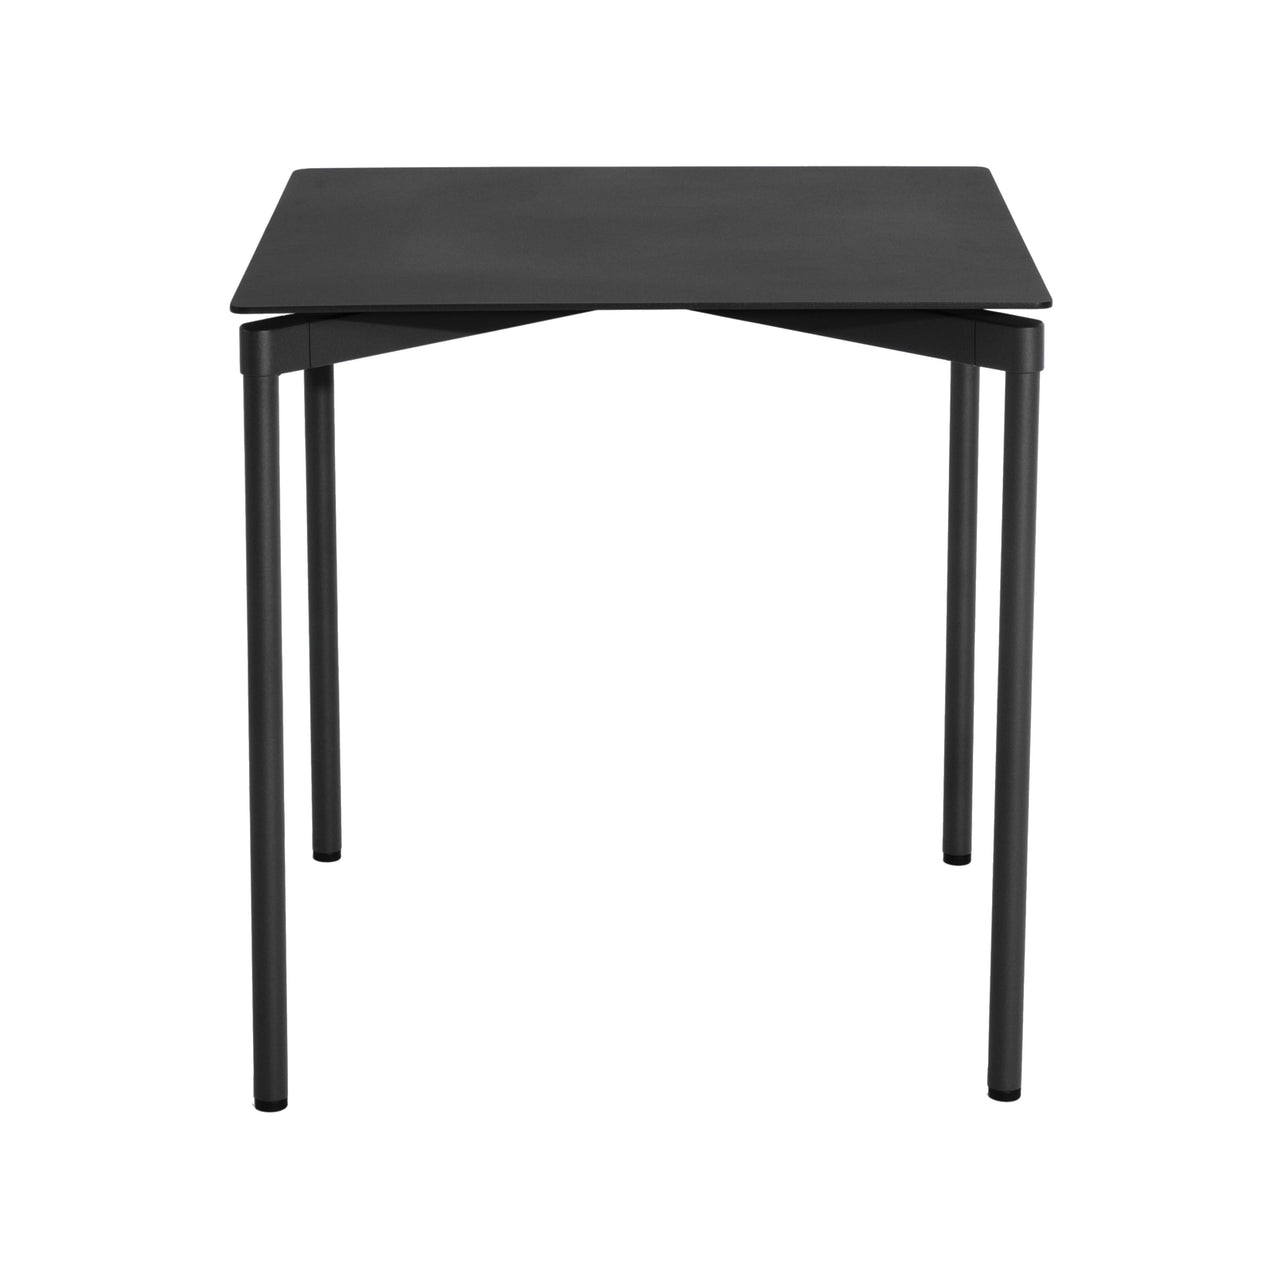 Fromme Dining Table: Outdoor + Square + Black